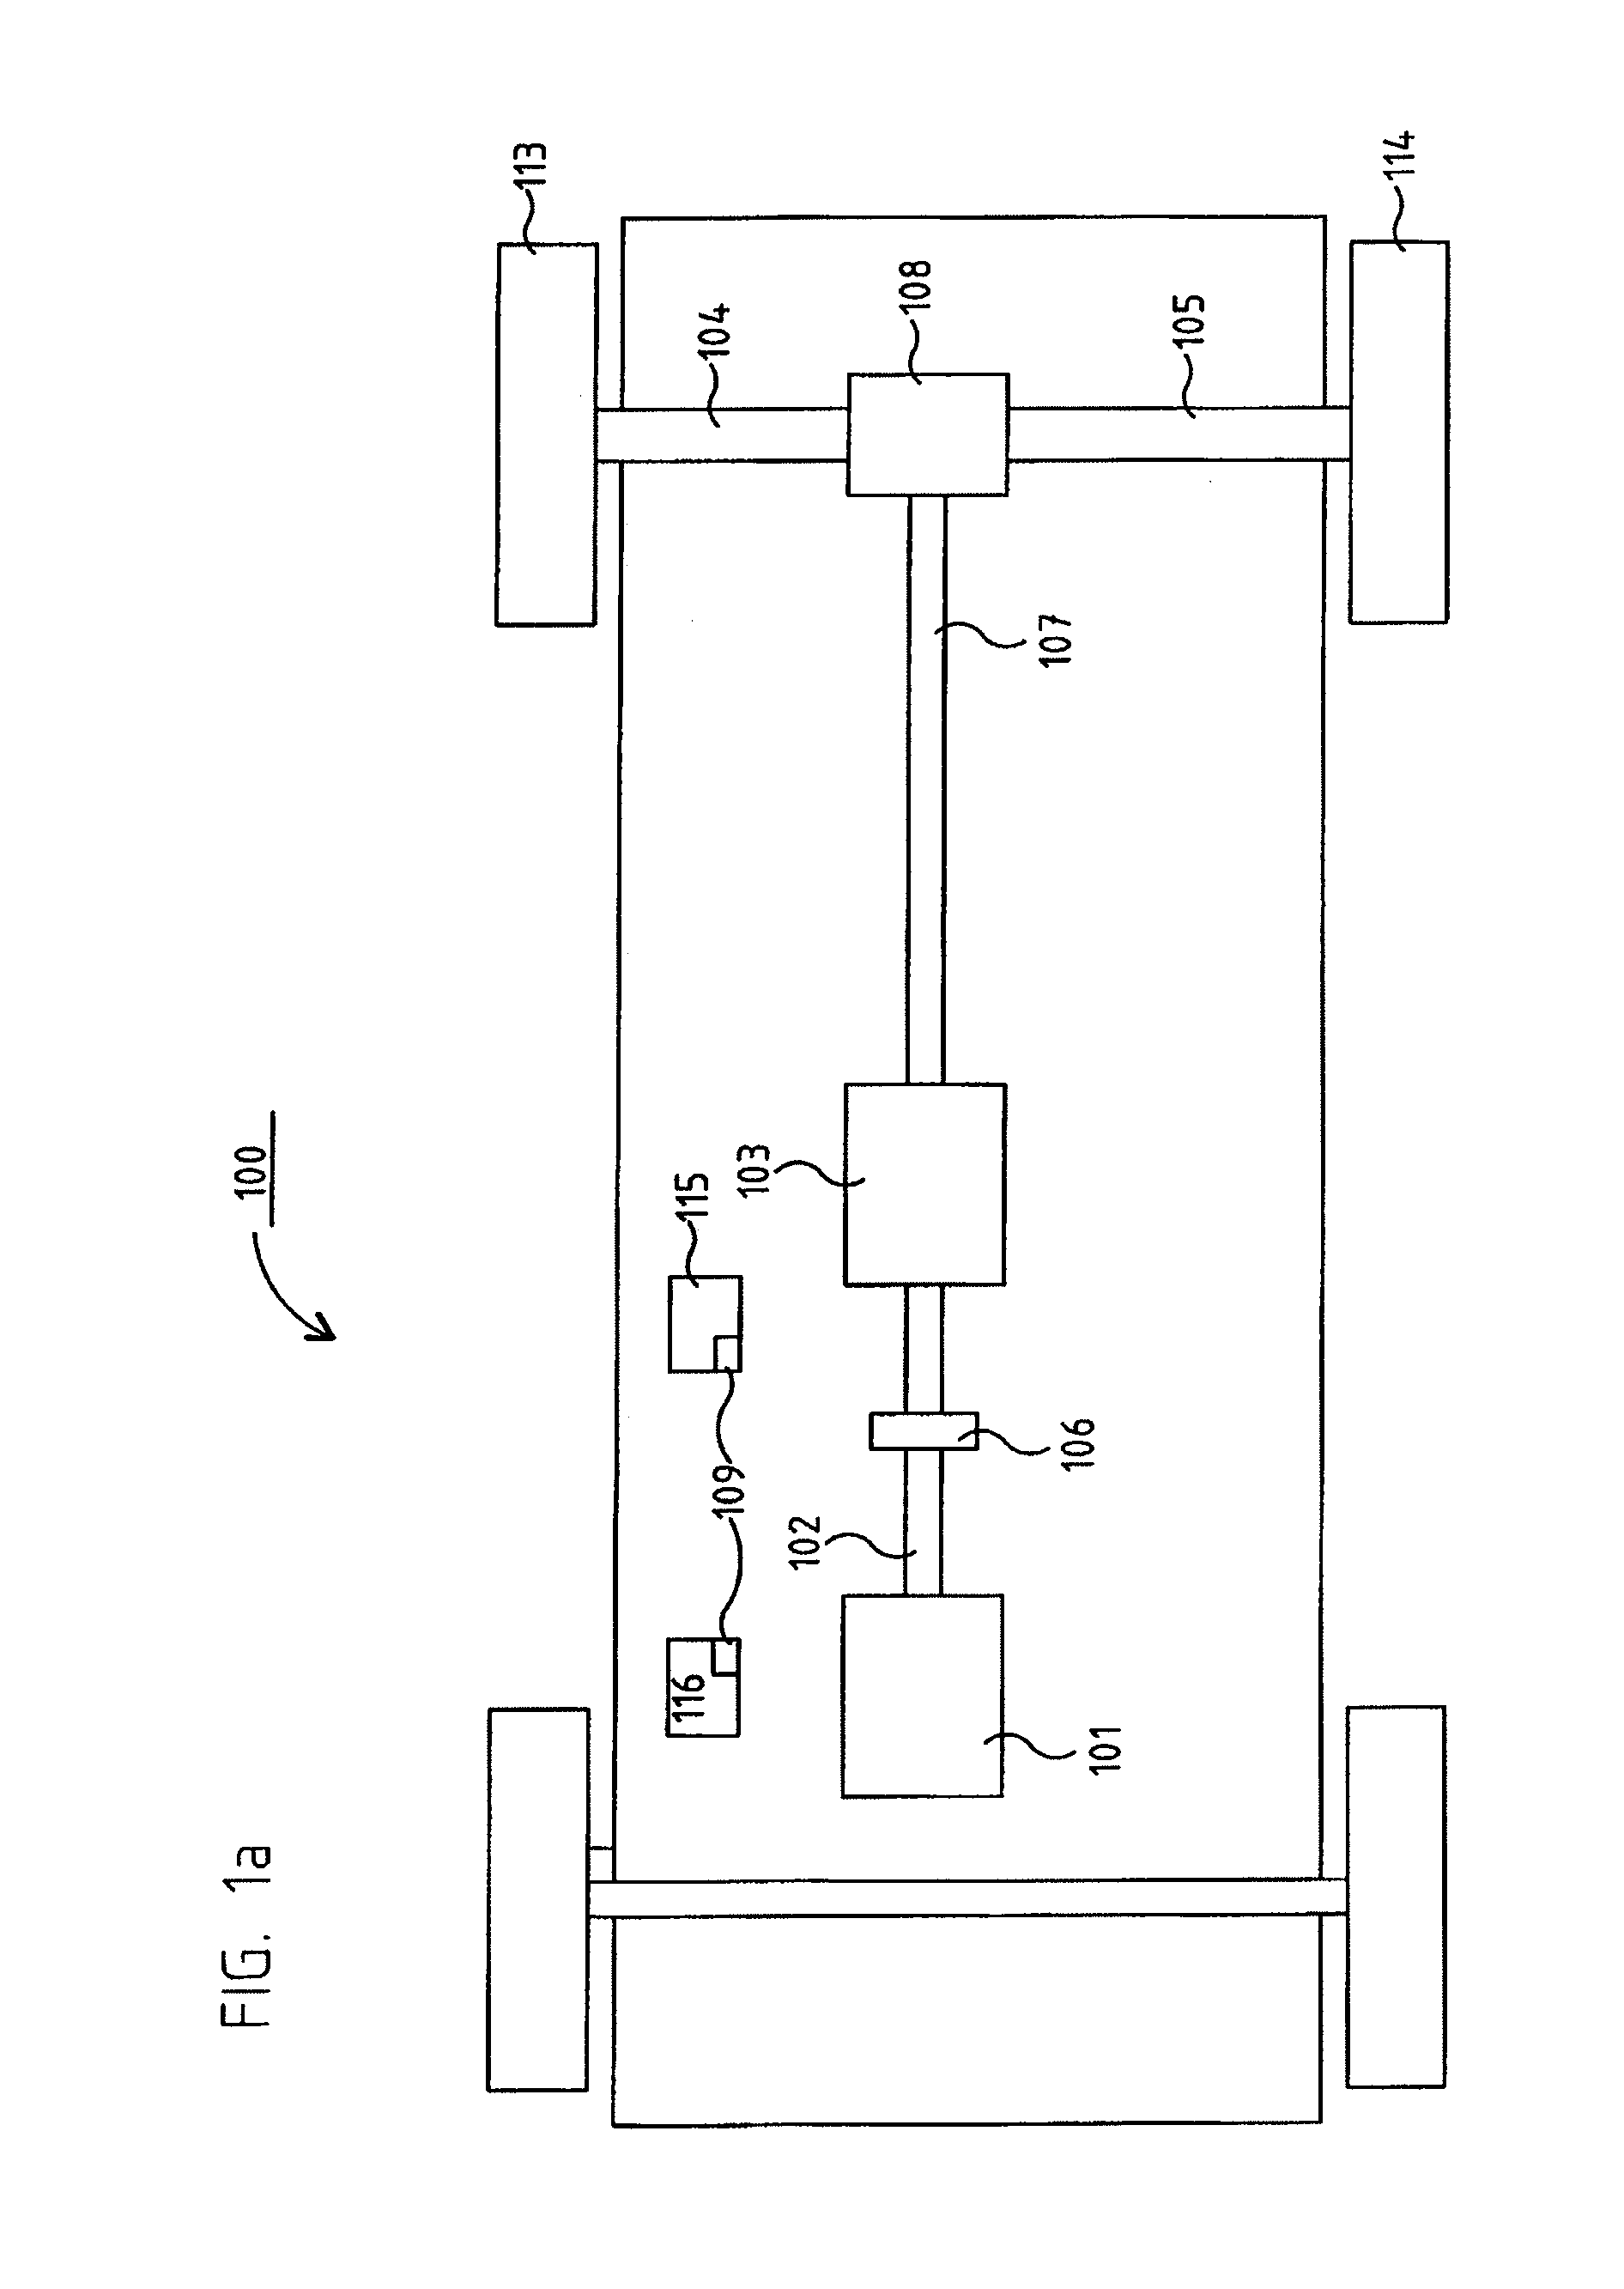 Method and system for driving of a vehicle